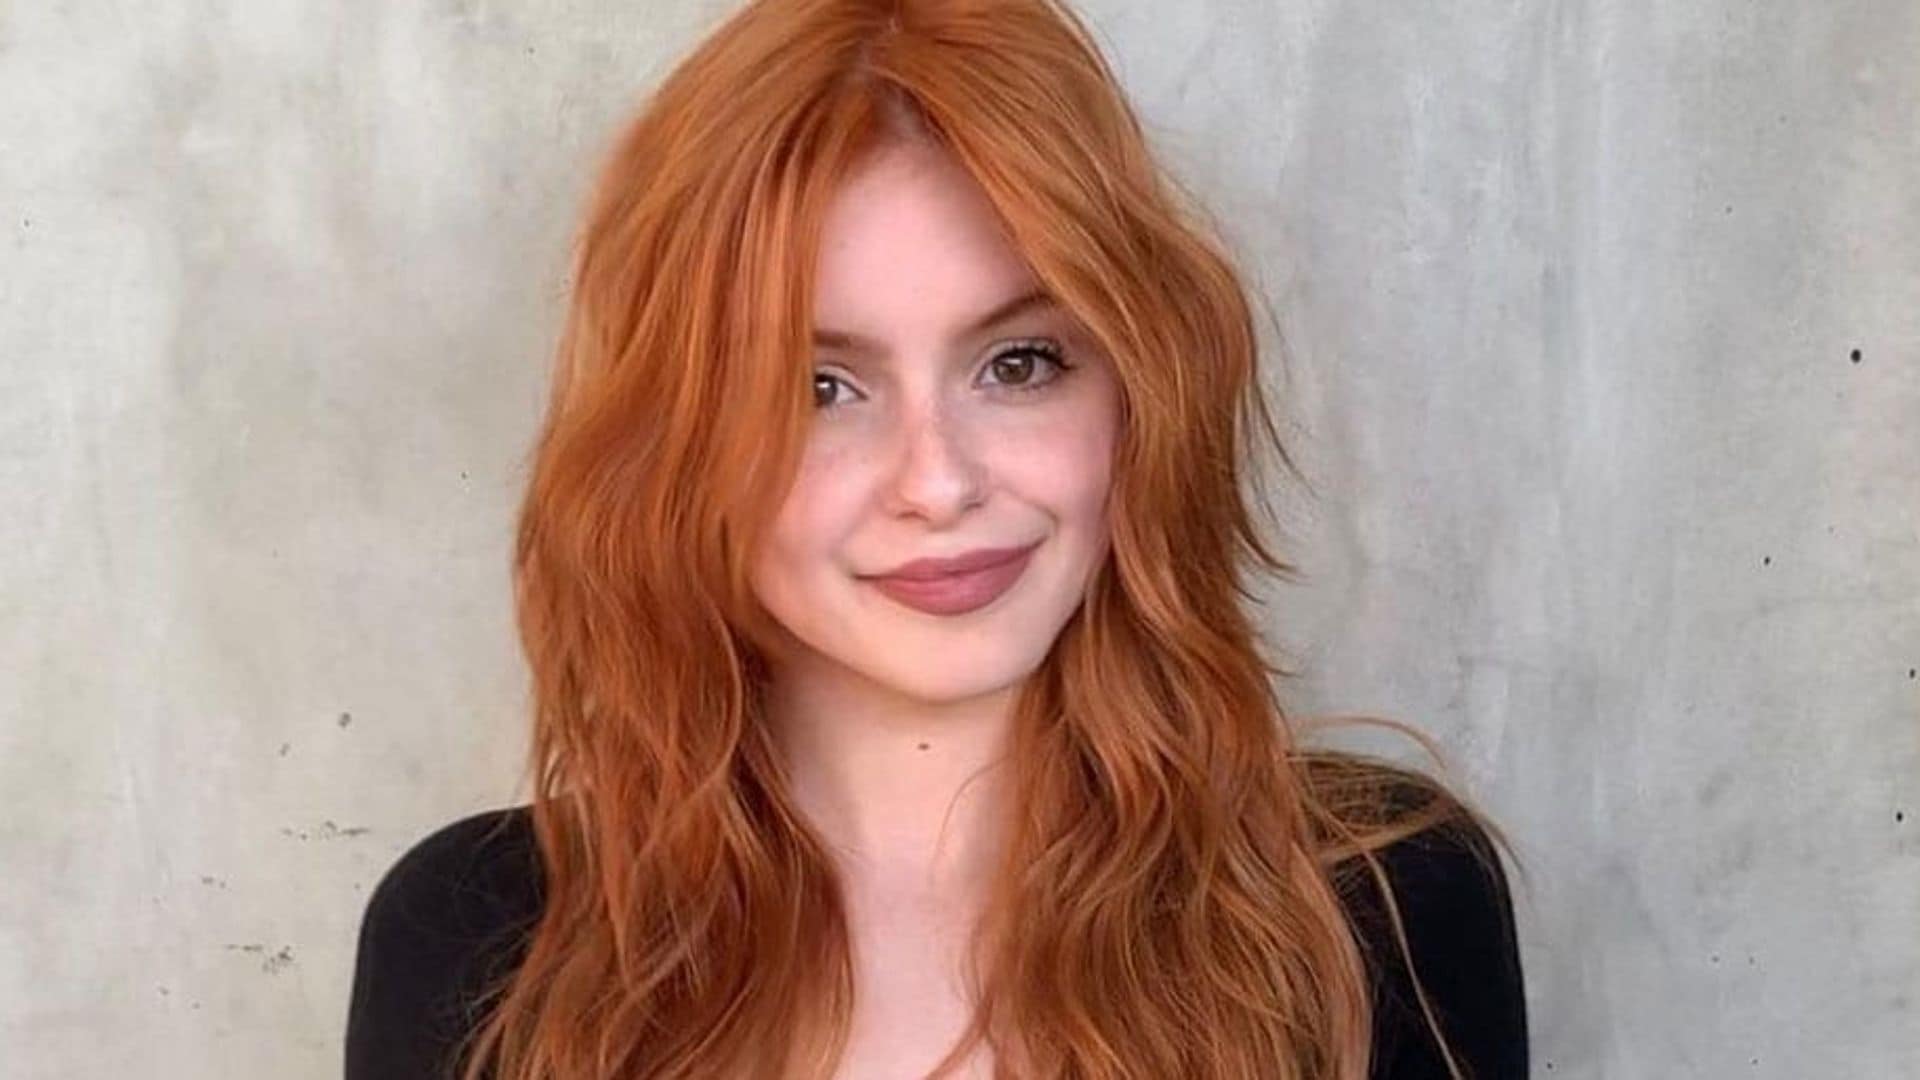 'Modern Family’s Ariel Winter is unrecognizable with fiery 'Jessica Rabbit' hair